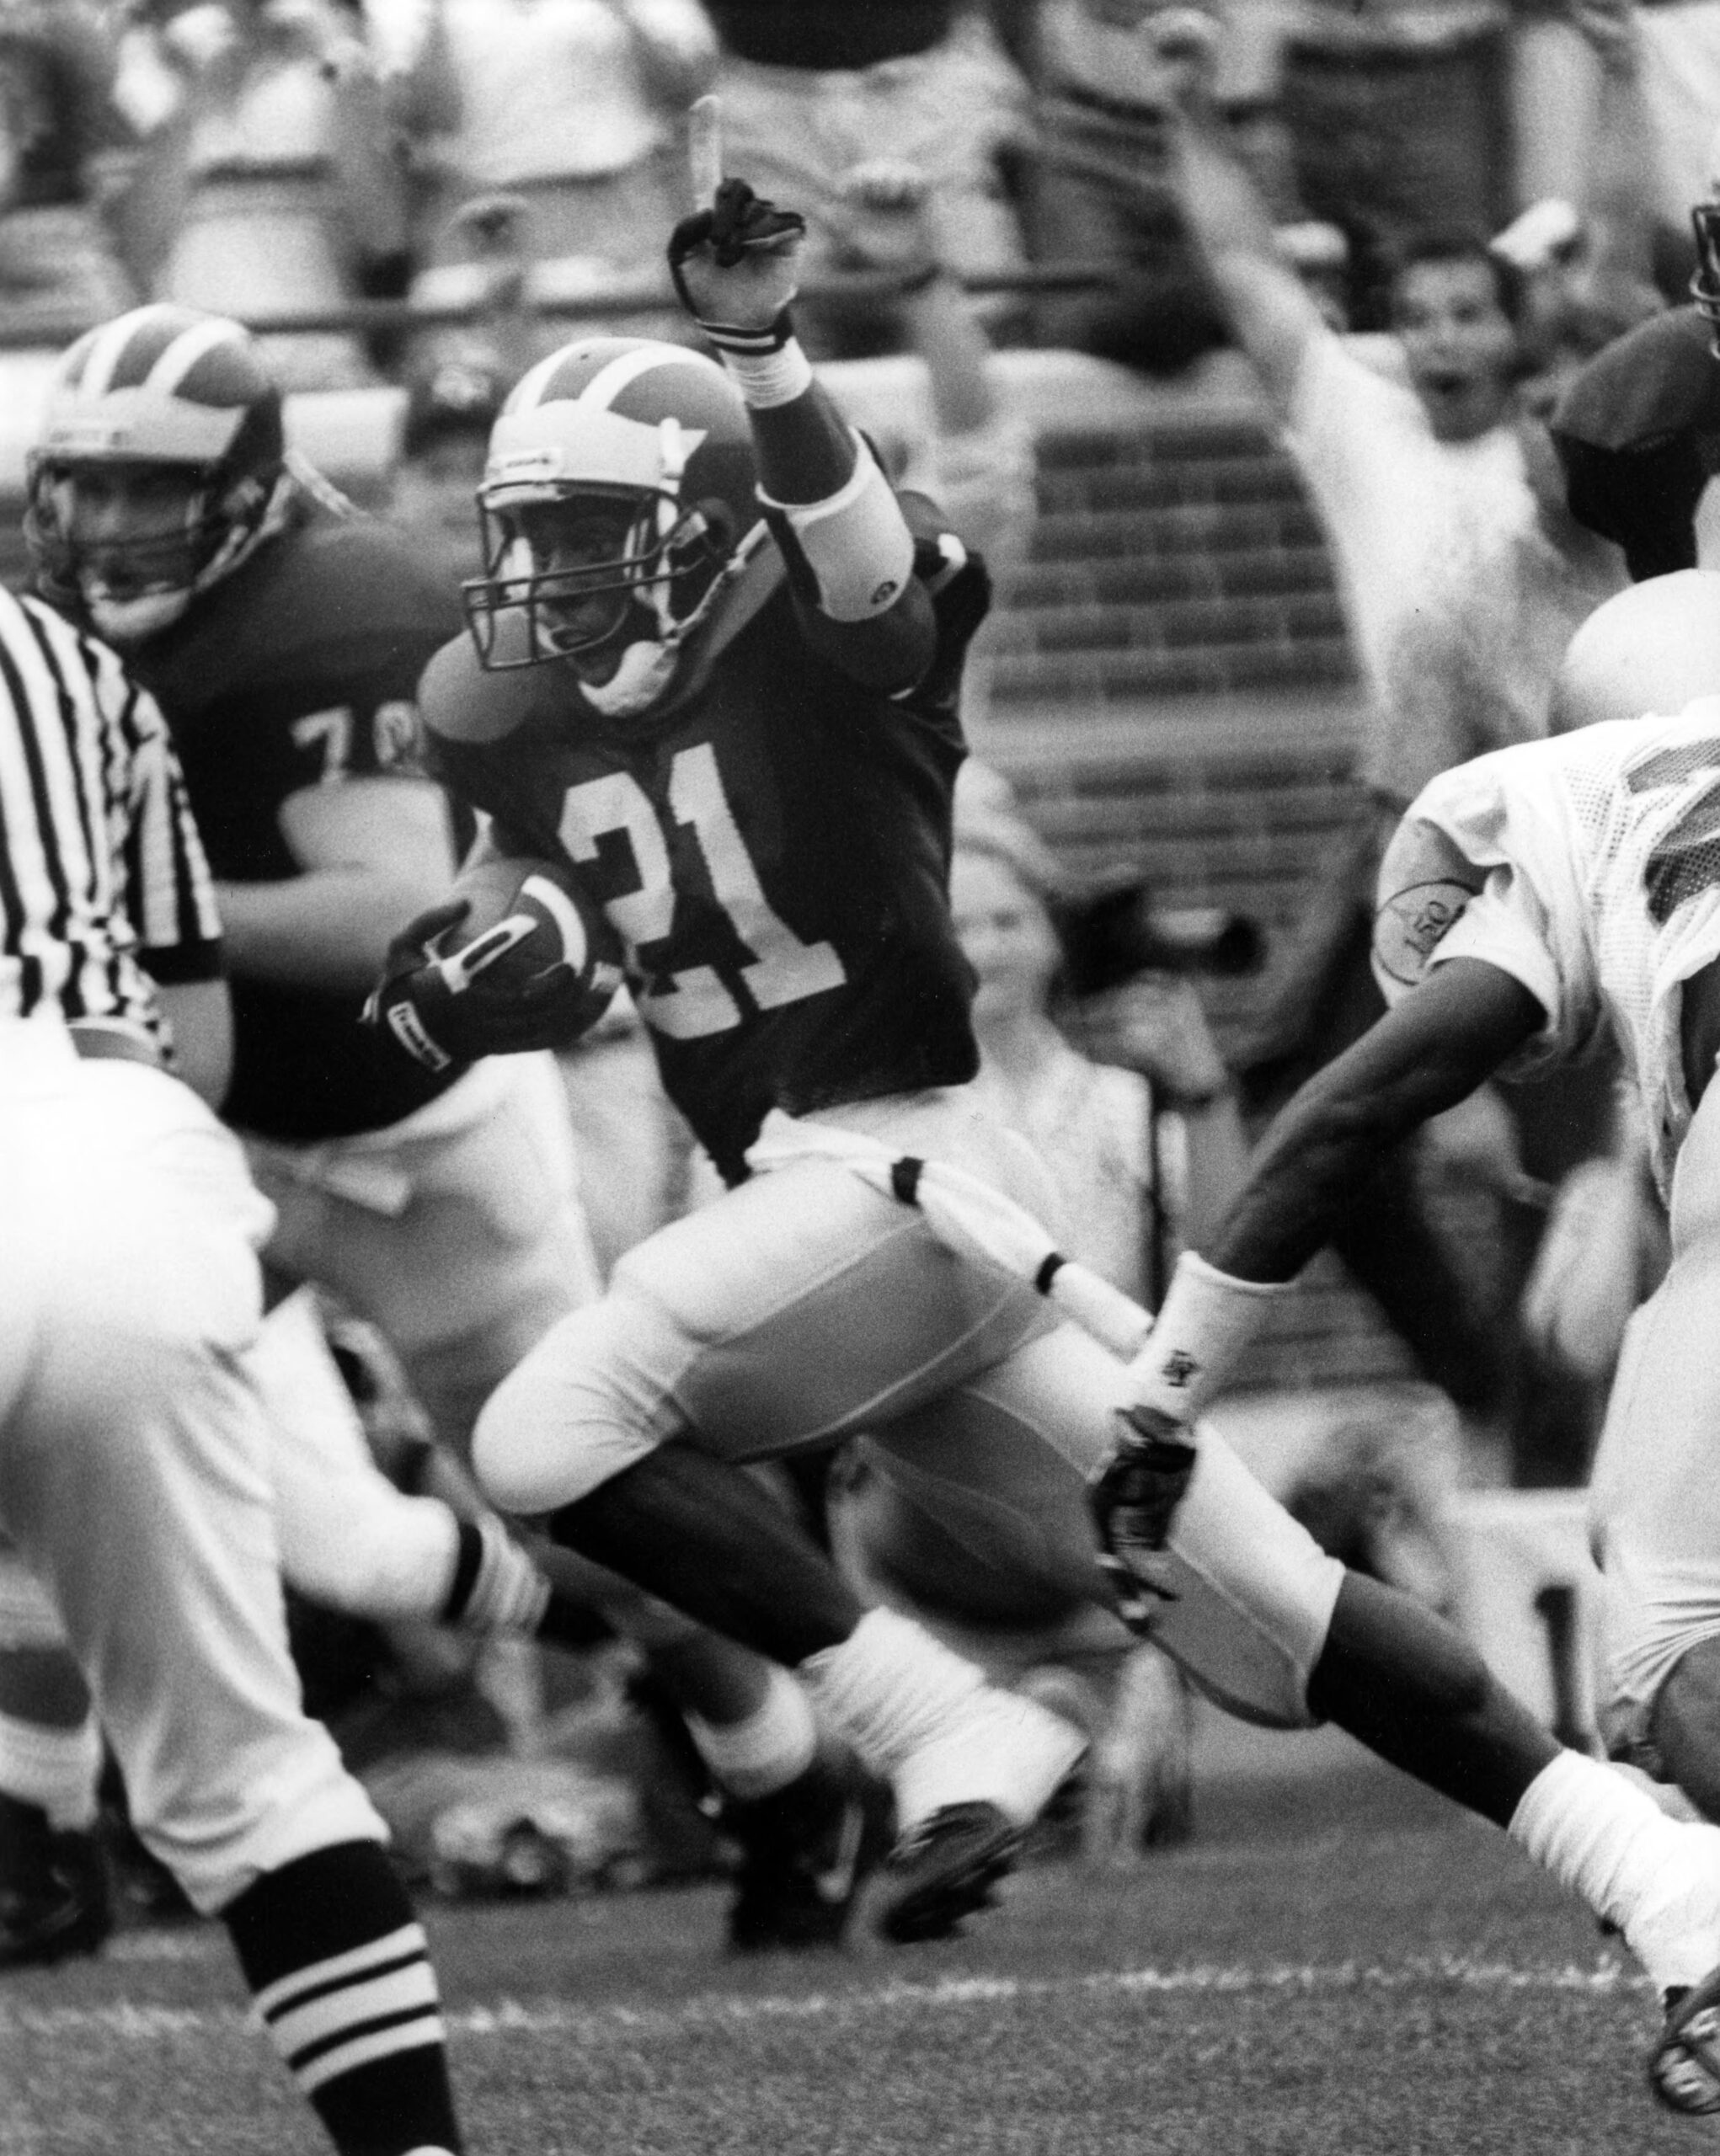 Black and white photo of Desmond Howard, wearing the number 21, in a football game, running with the ball in his right hand.